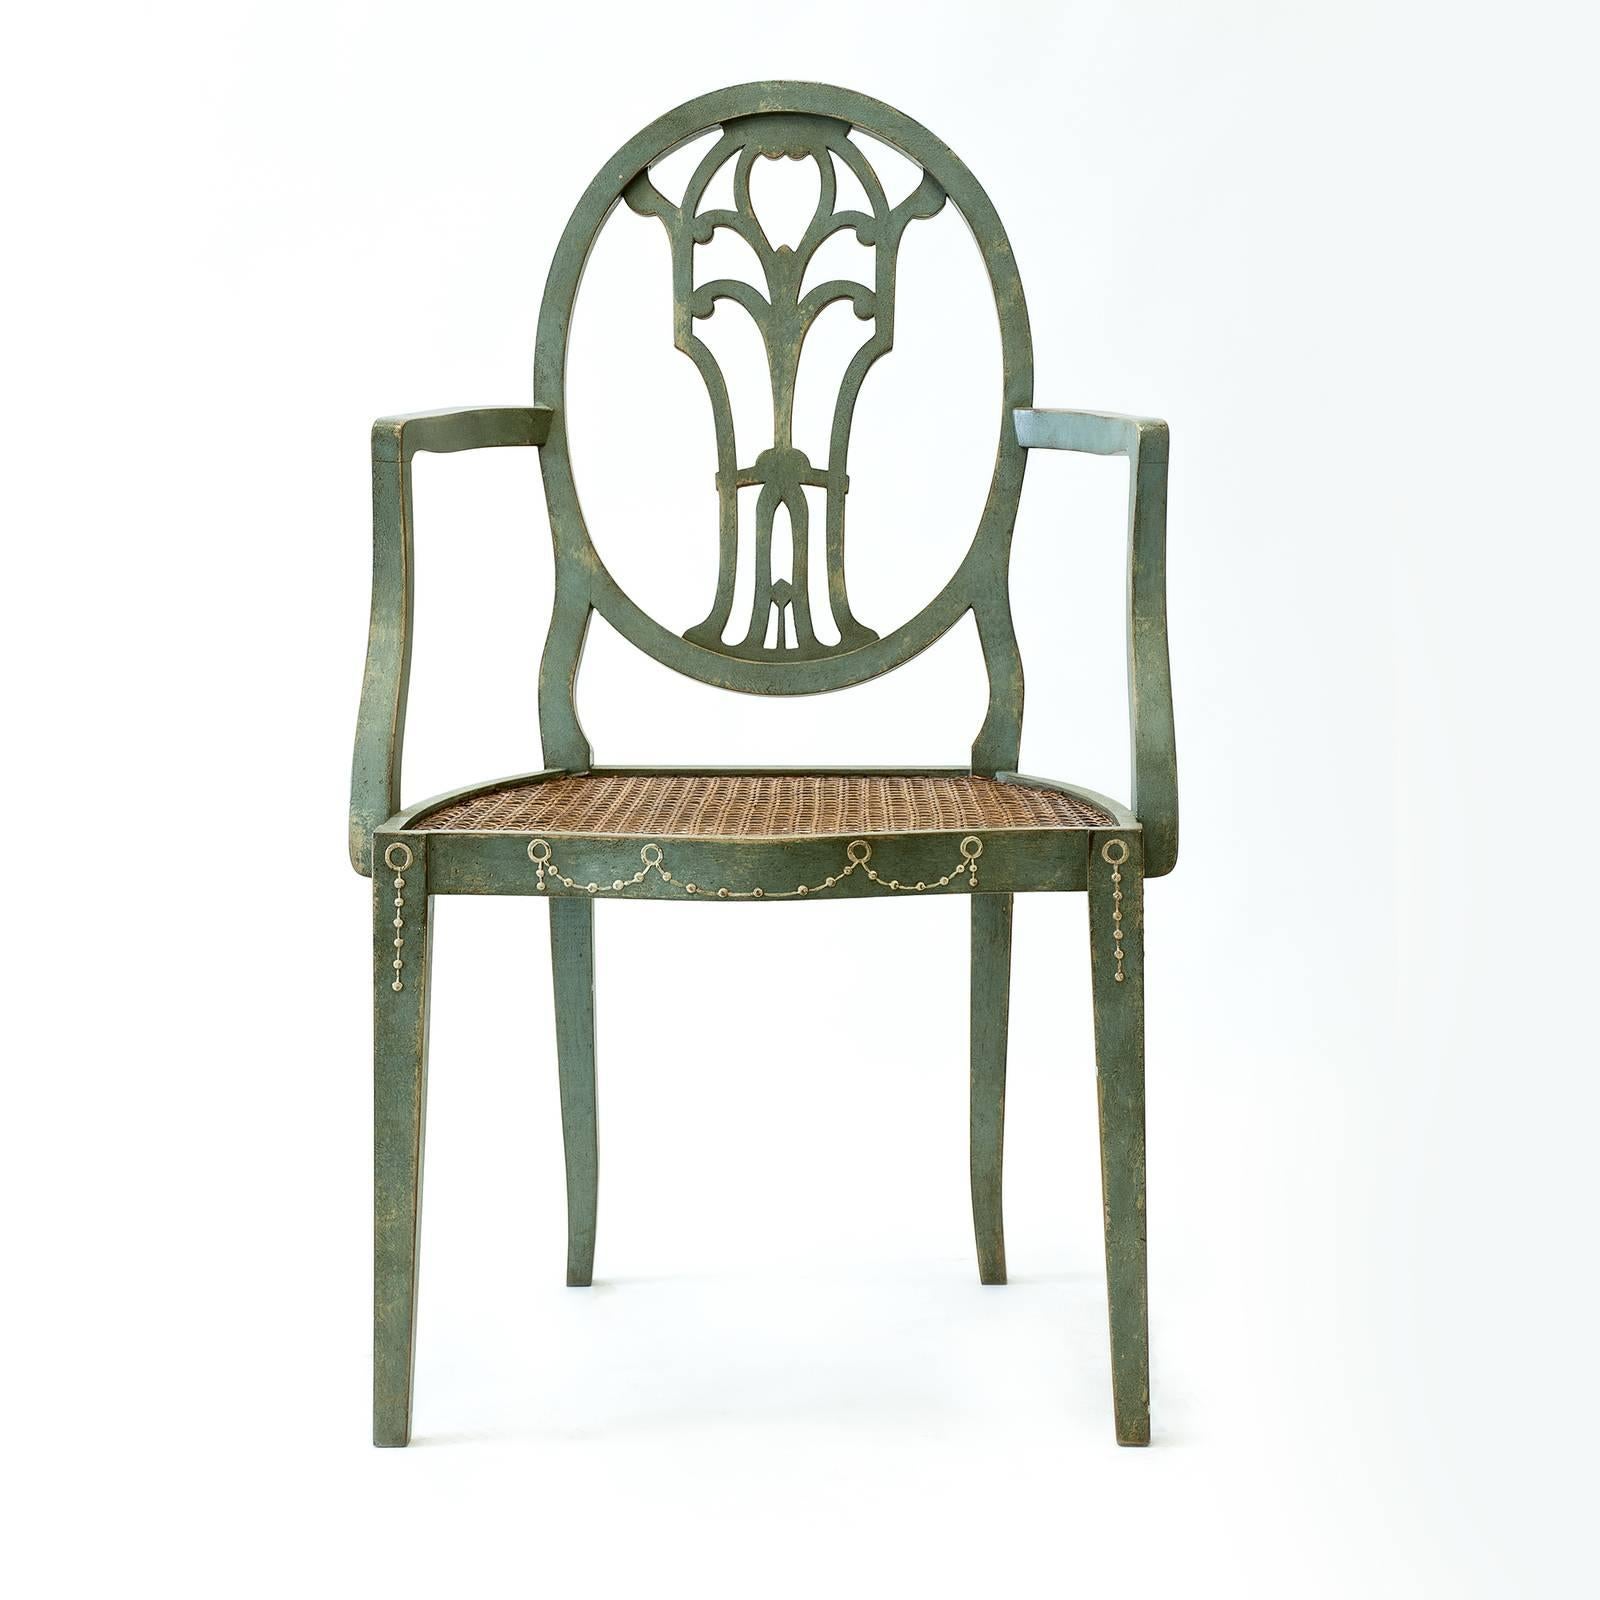 The classic design of this exclusive dining chair with armrests will complement a broad variety of interiors, offering both sophistication and comfort. The solid wood frame boasts a hand painted antique sage green finish, which enhances the